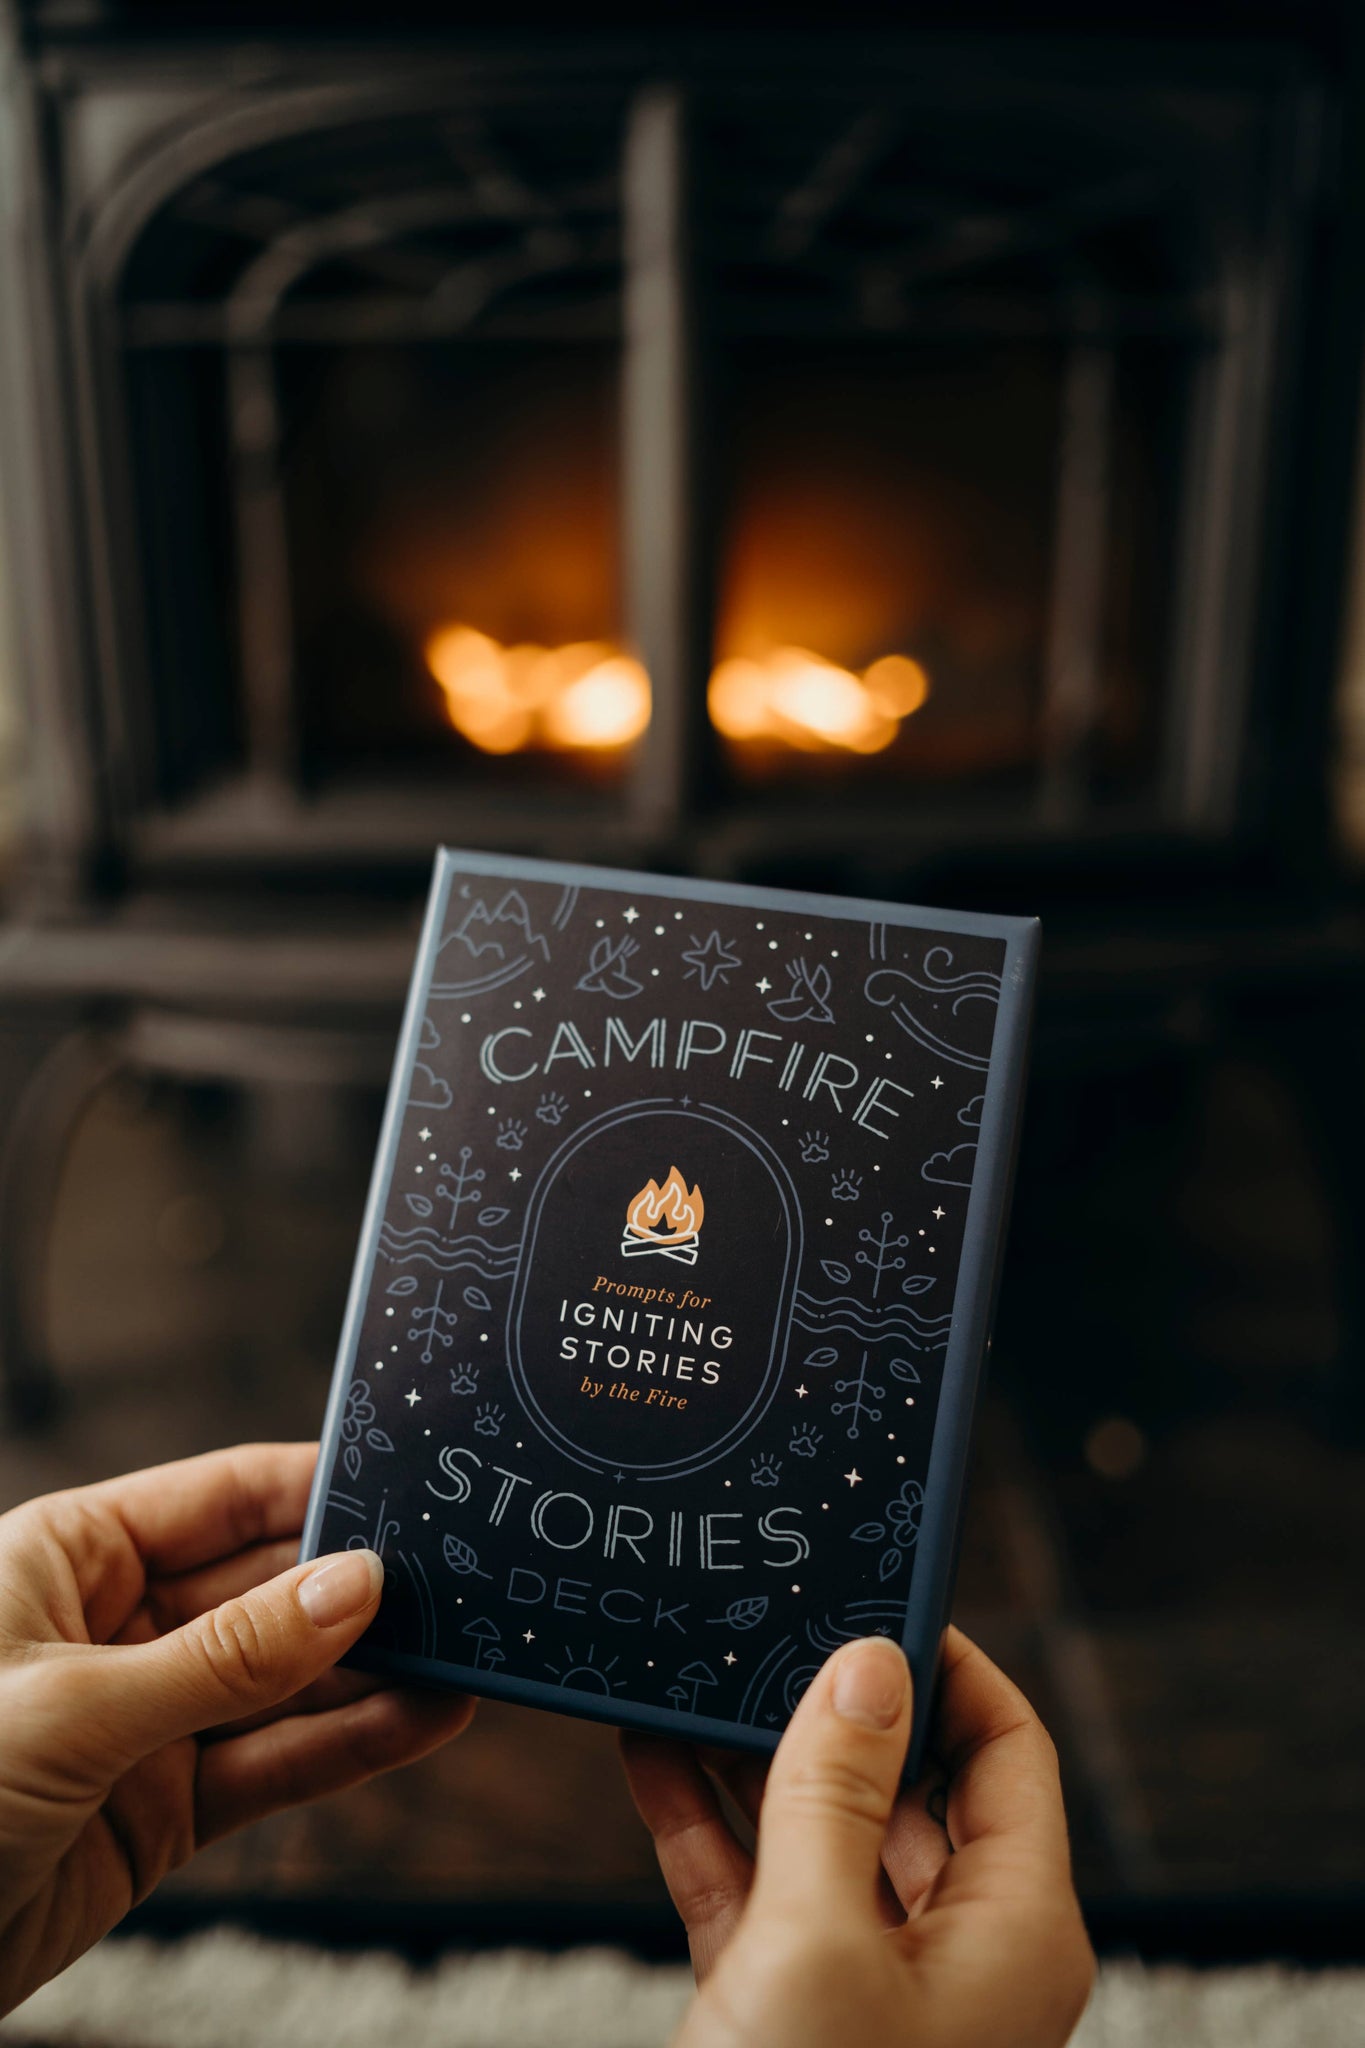 Mountaineers Books - Campfire Stories Deck Prompts for Igniting Stories